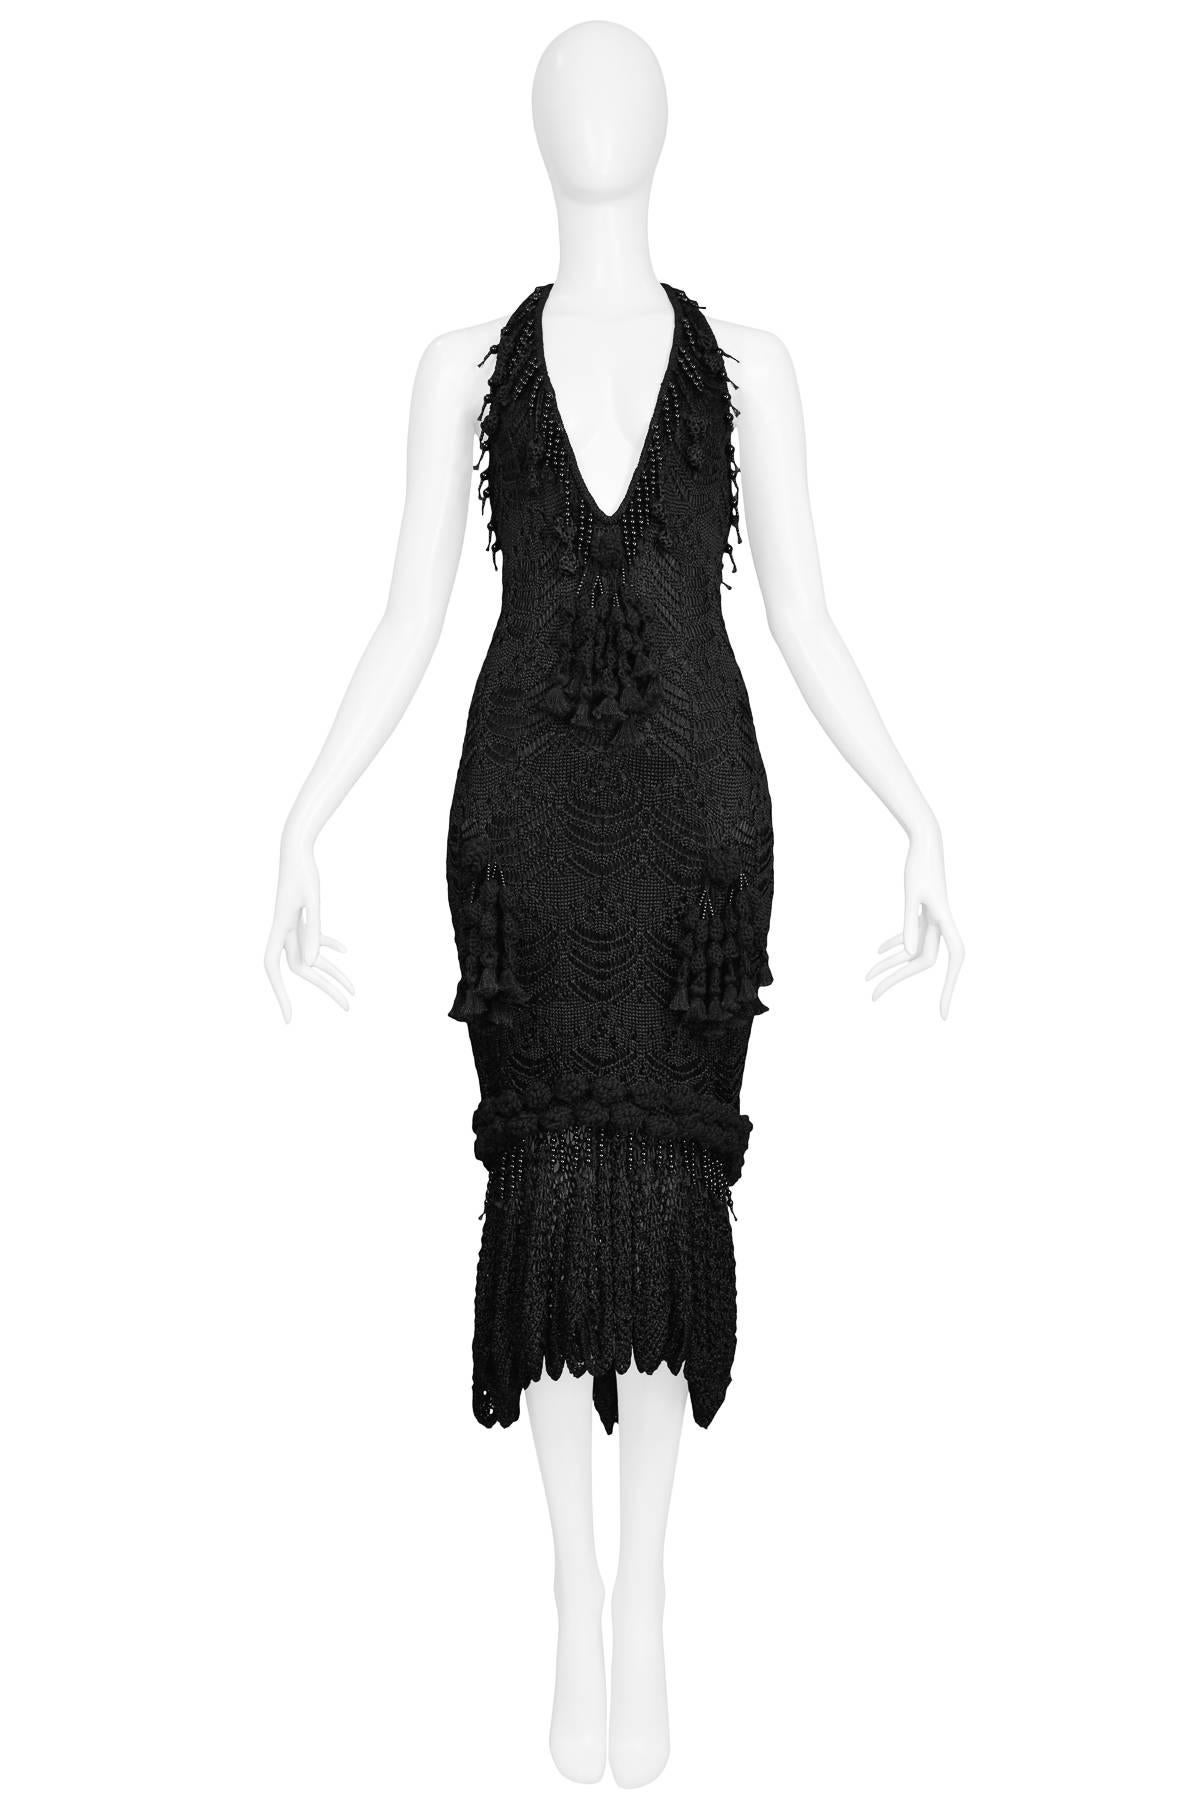 Vintage John Galliano black cotton silk blend crochet backless dress with halter plunge neckline, beaded tassel detail throughout & fishtail hem. 

Condition: New with tags; Never worn.

Size: Medium.